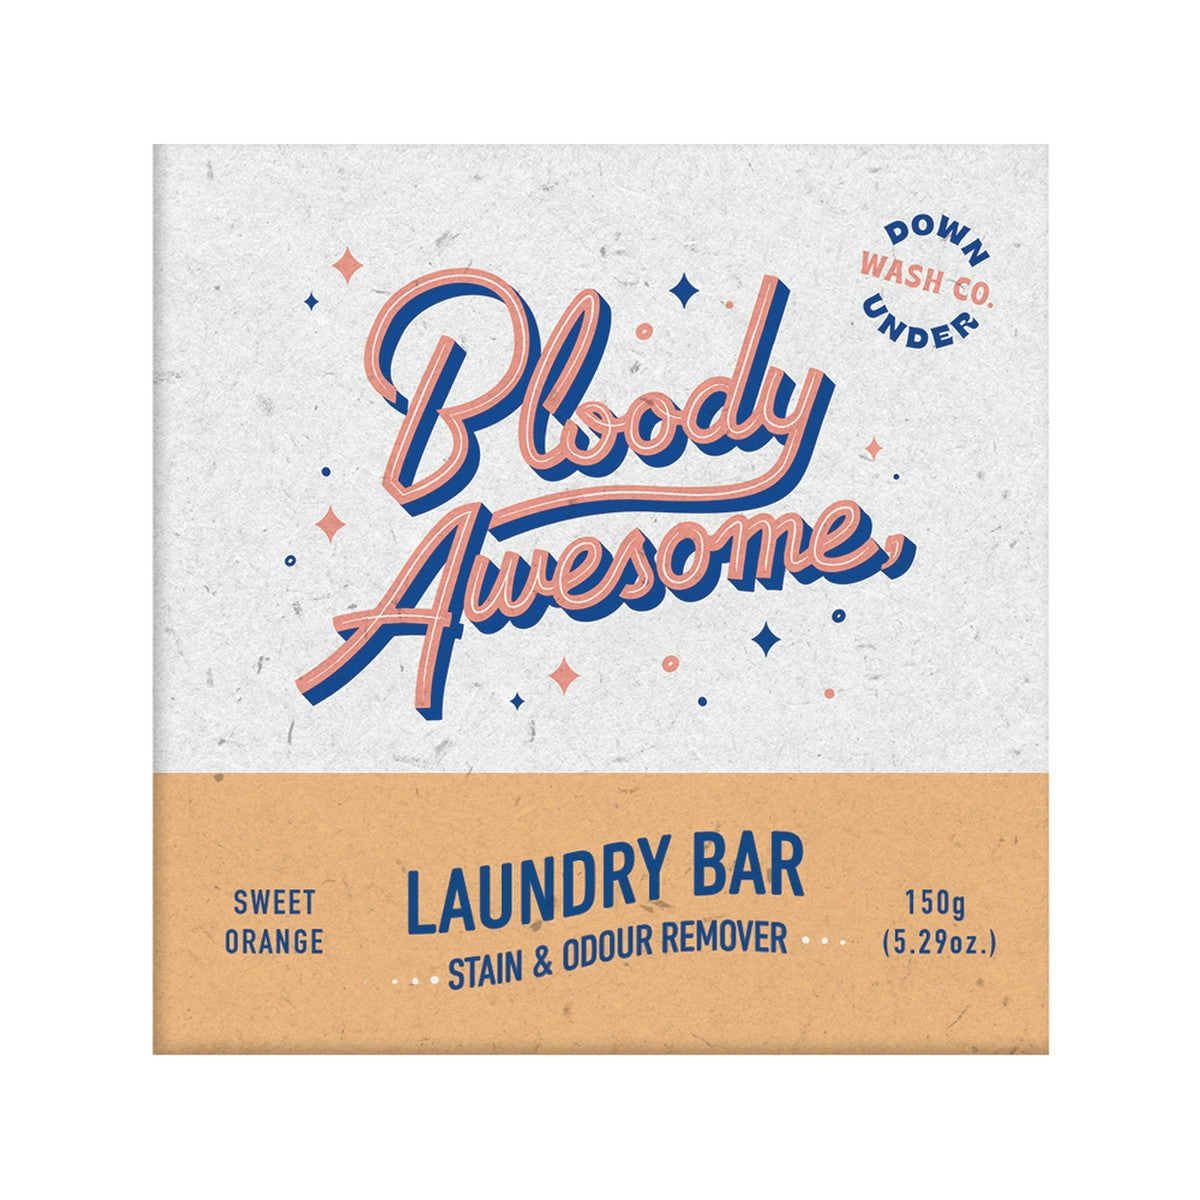 image of Downunder Wash Co. (Bloody Awesome) Laundry Bar Stain & Odour Remover Sweet Orange 150g on white background